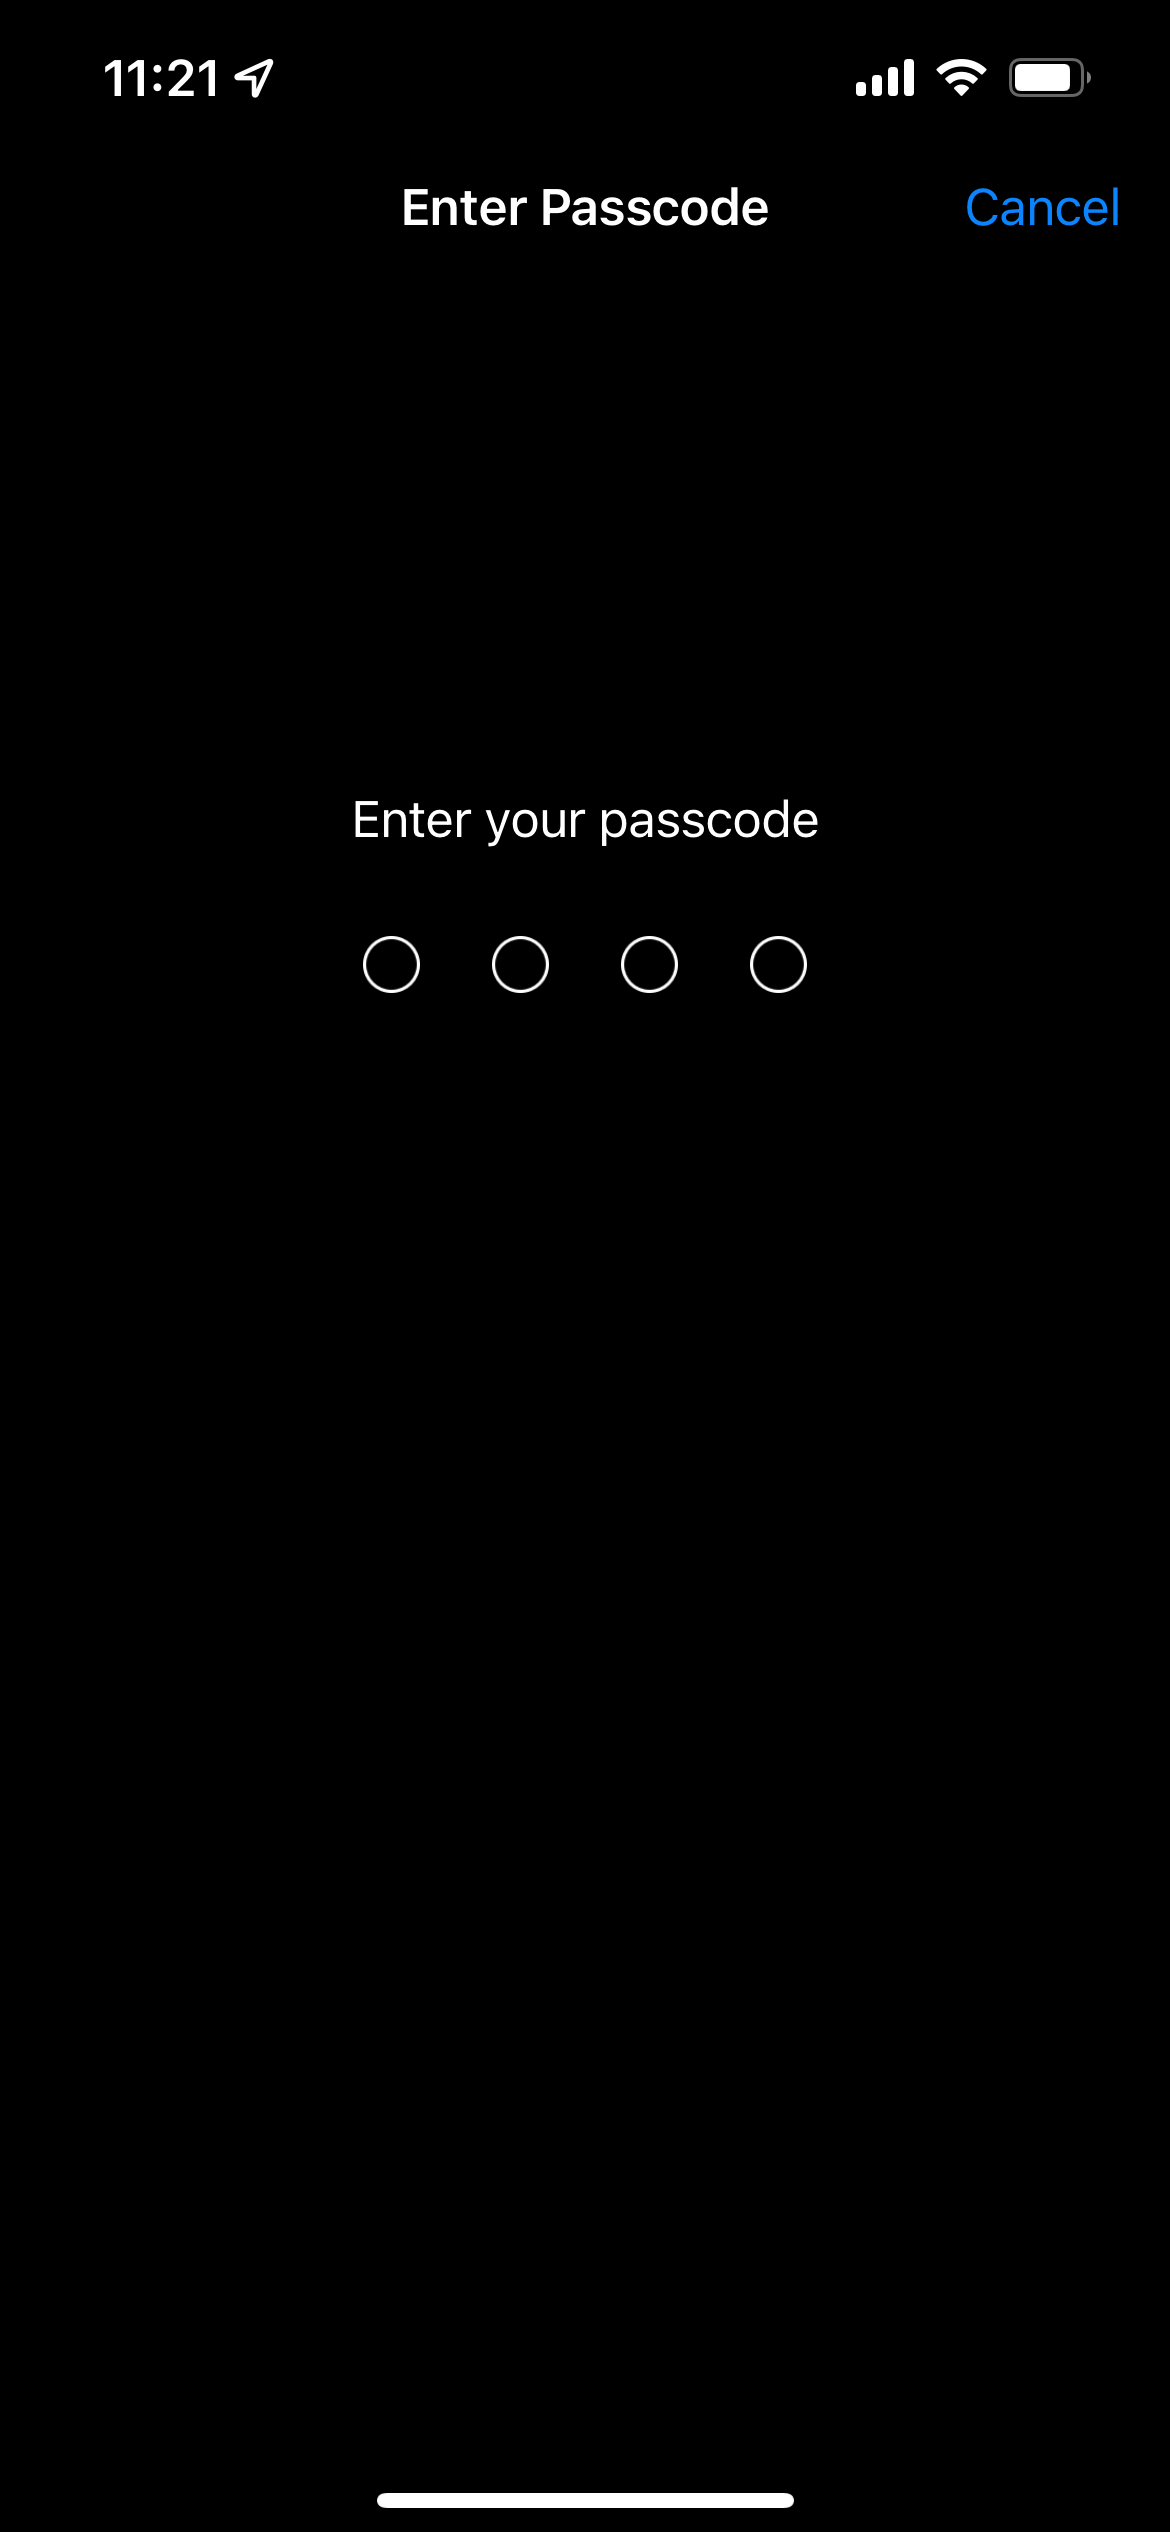 Enter passcode to access settings in iOS settings